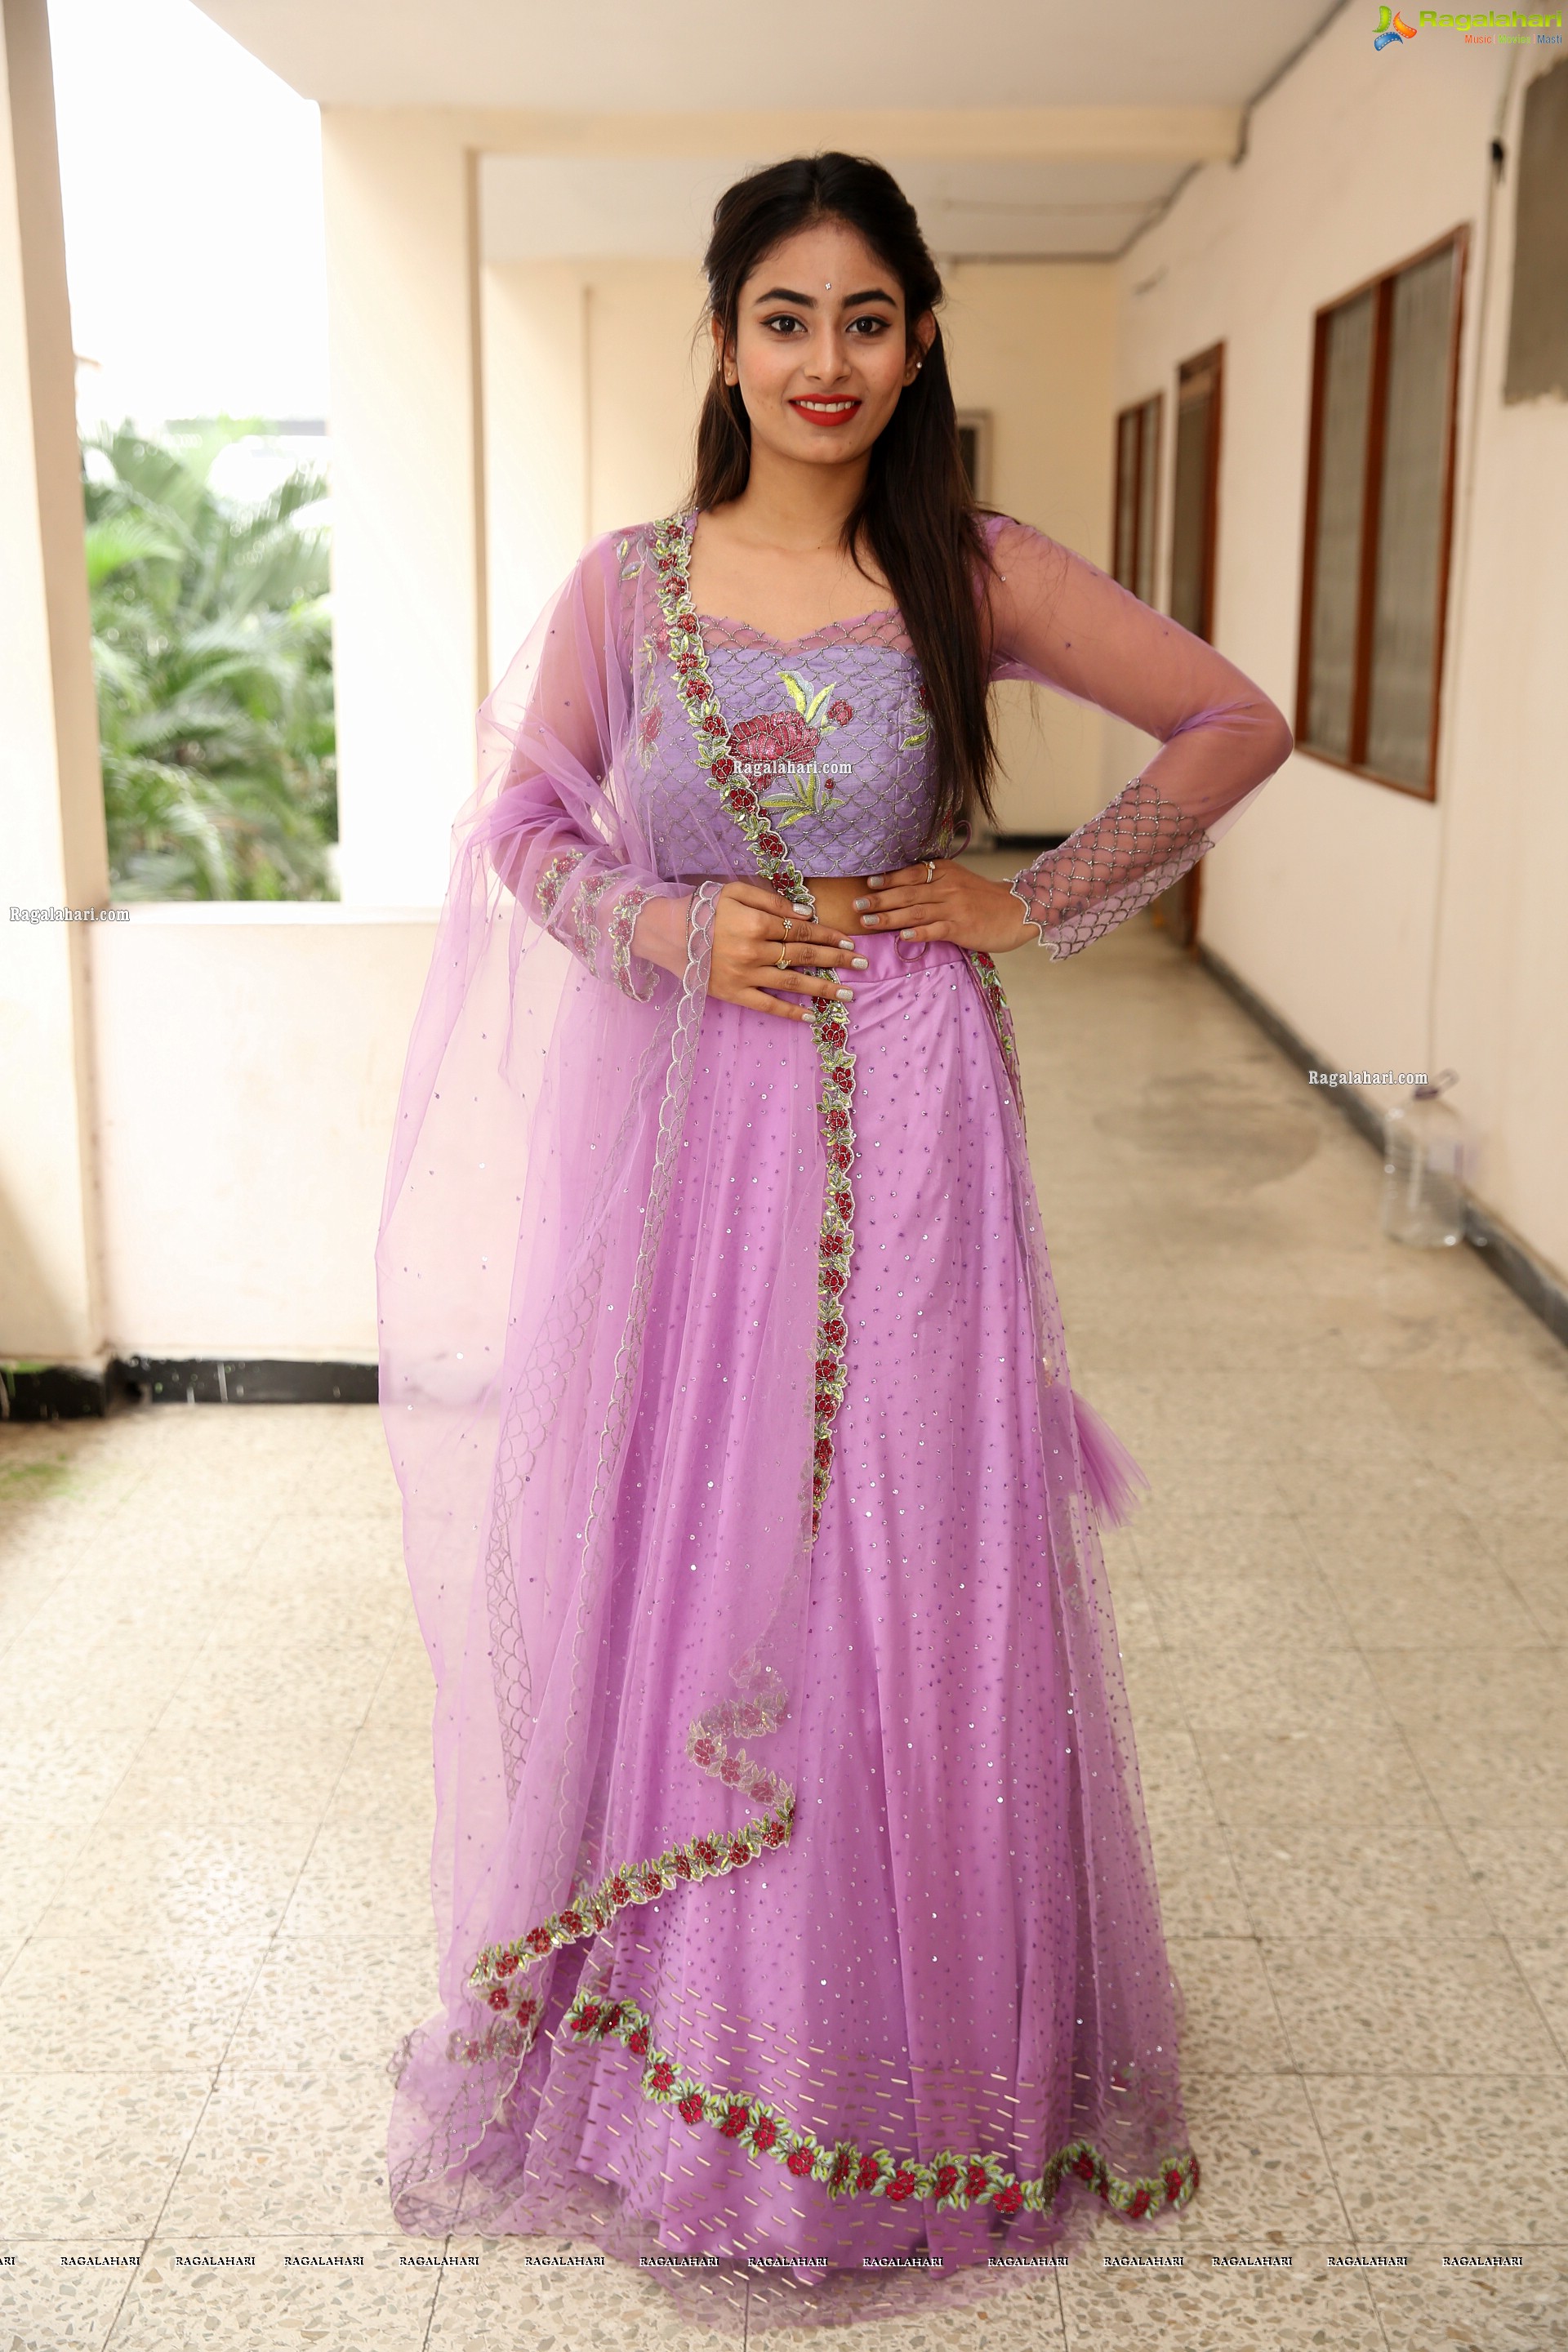 Honey Chowdary at Sutraa A Festive Special Curtain Raiser, HD Photo Gallery